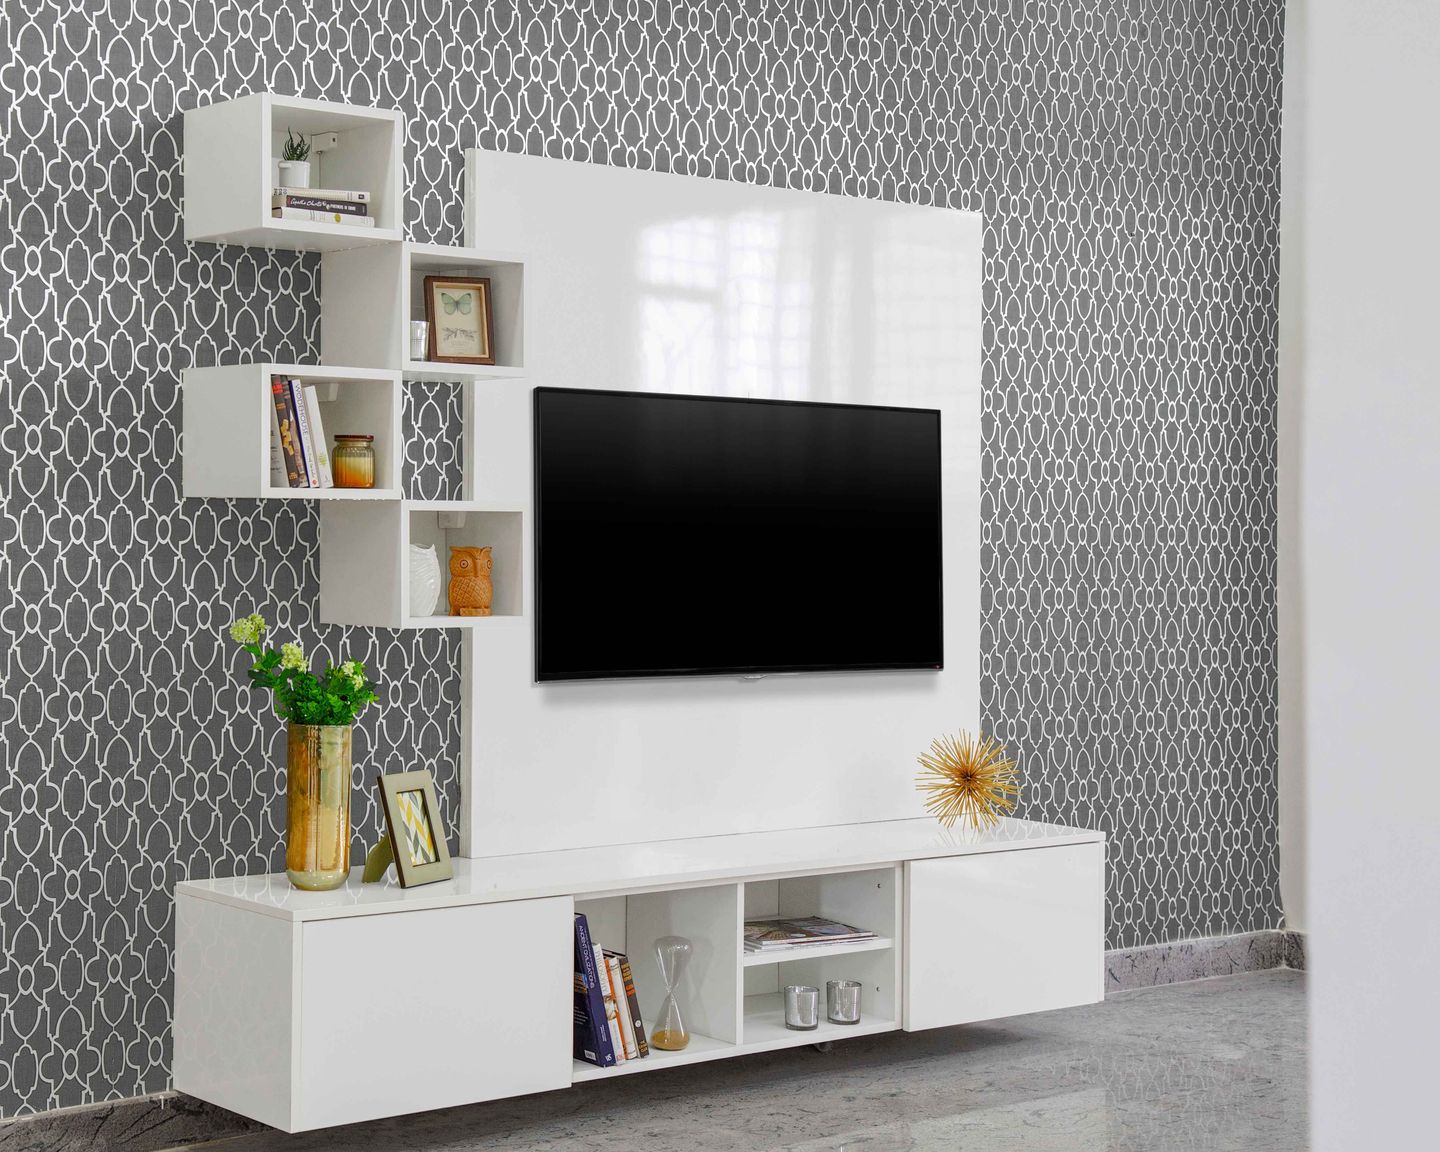 White TV Unit Design With Grey Patterned Wallpaper - Livspace